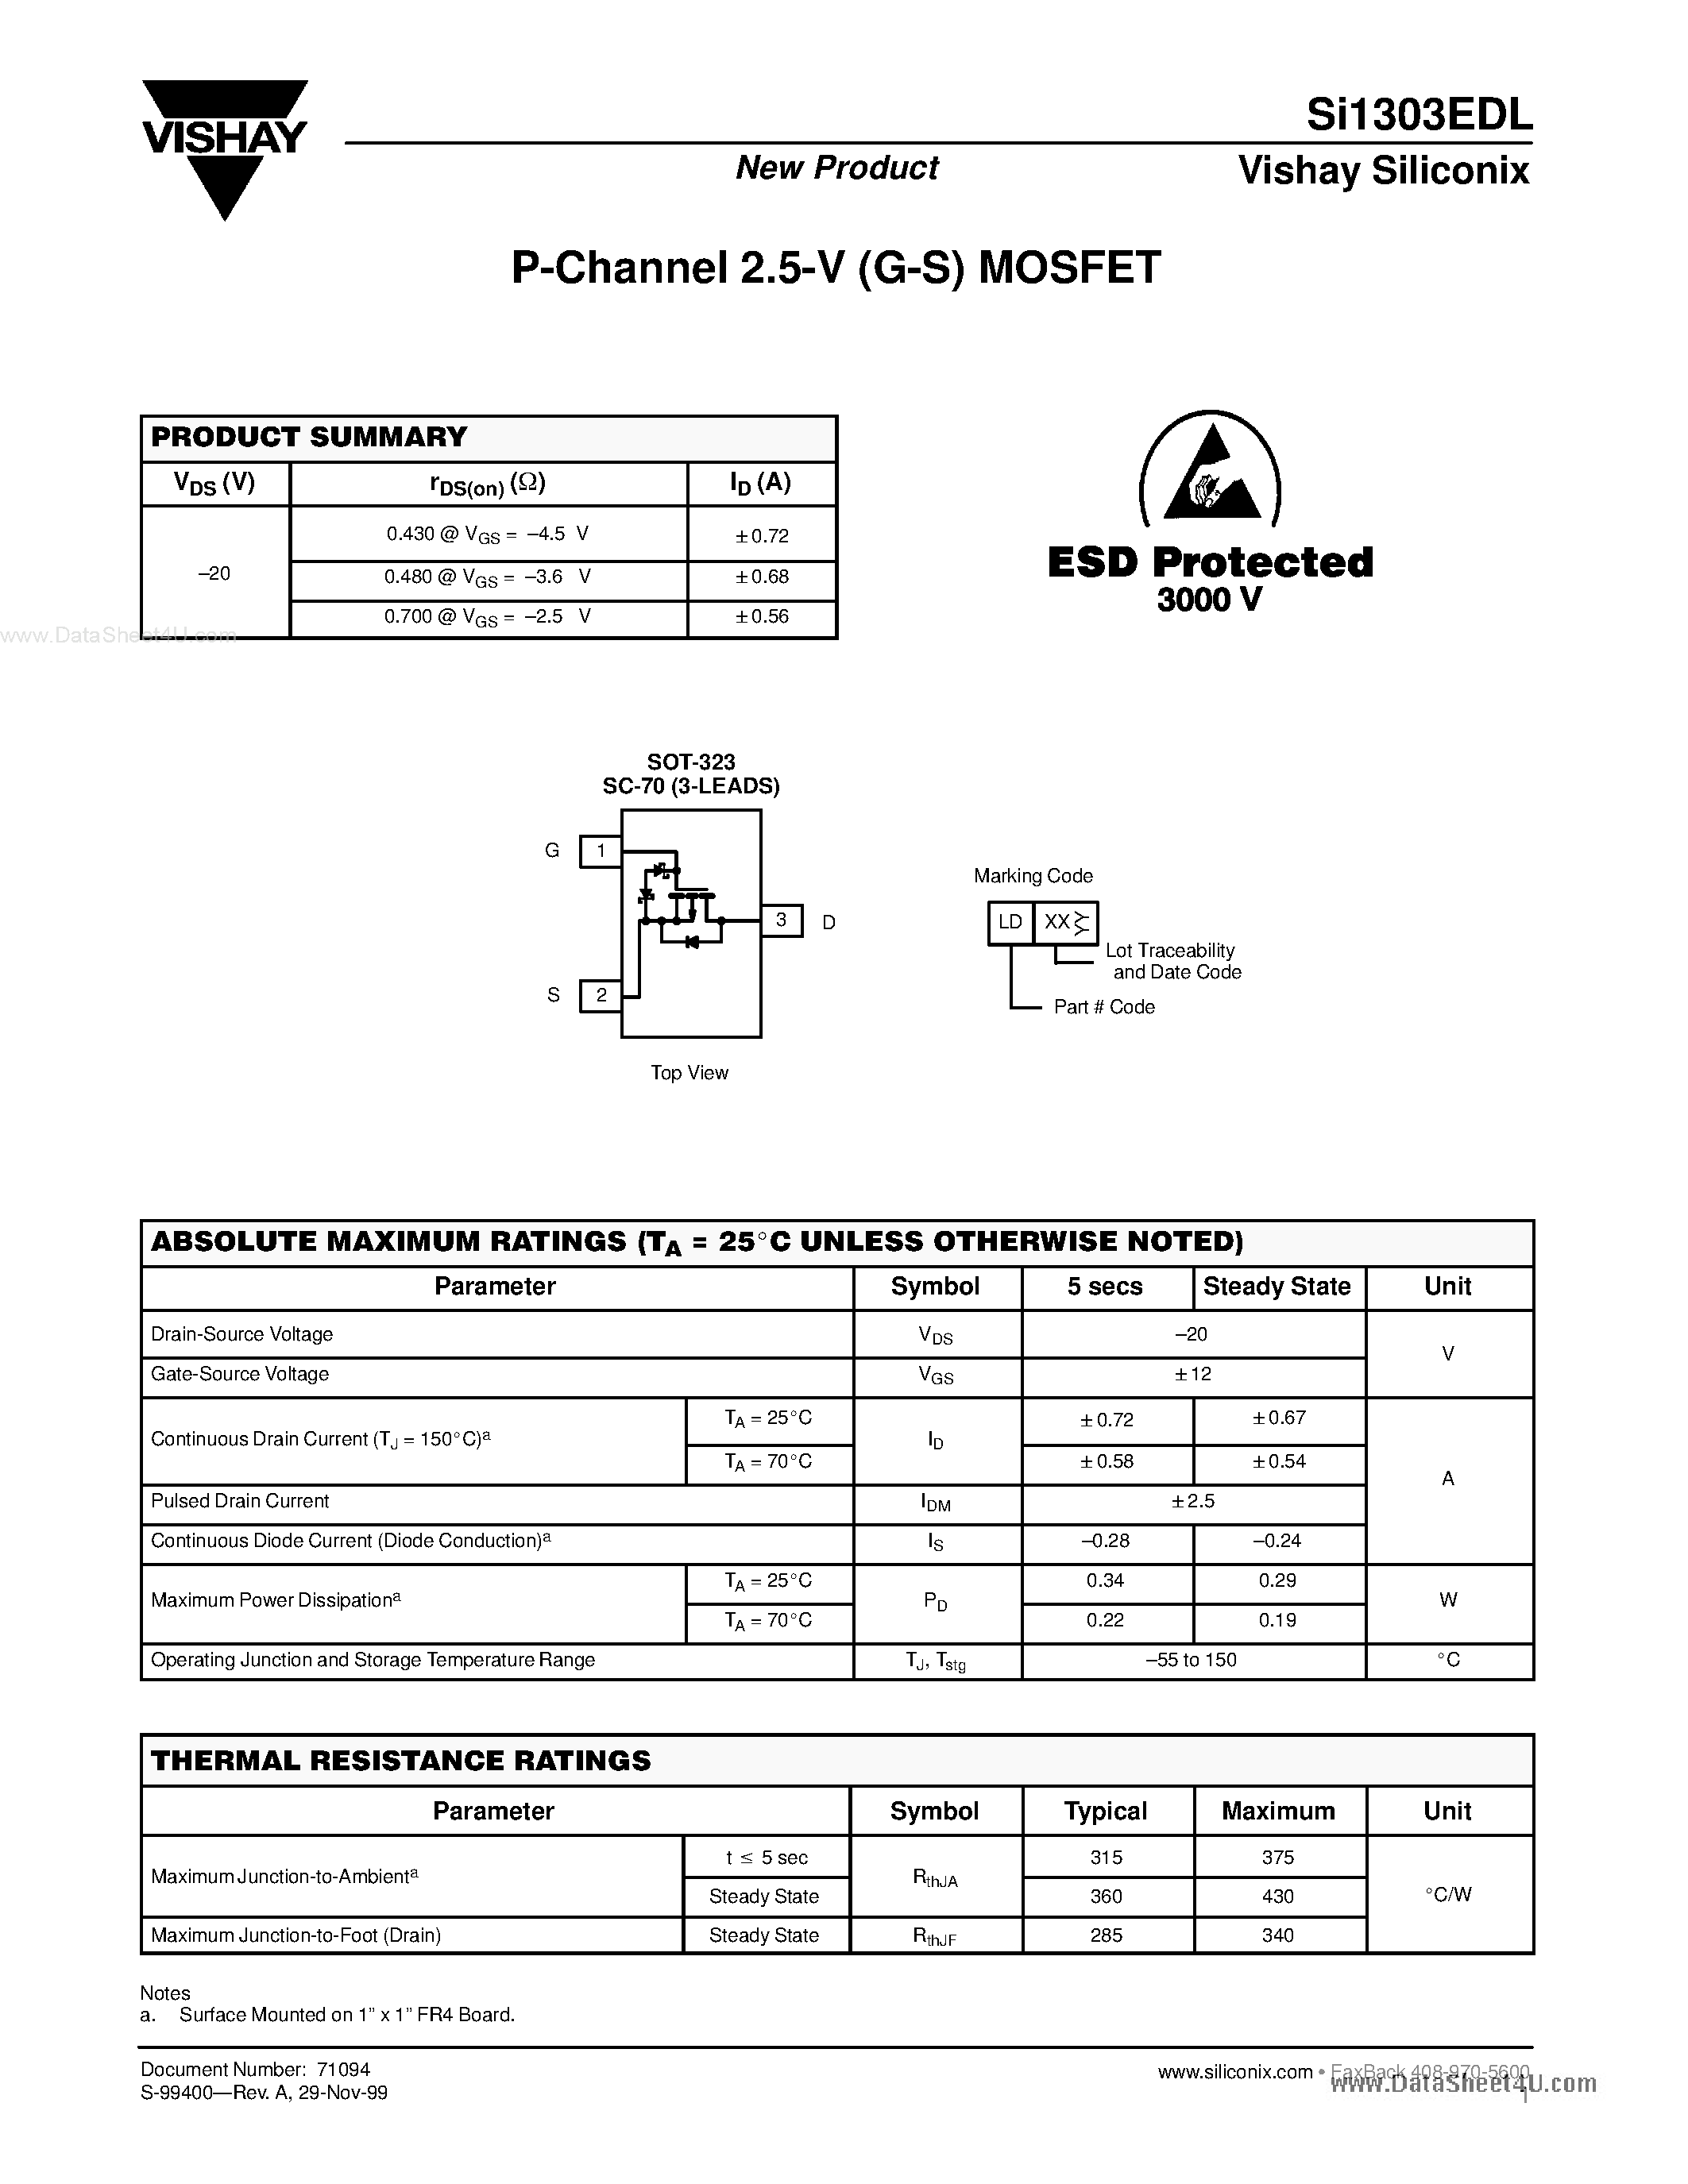 Даташит SI1303EDL - P-Channel 2.5-V (G-S) MOSFET страница 1